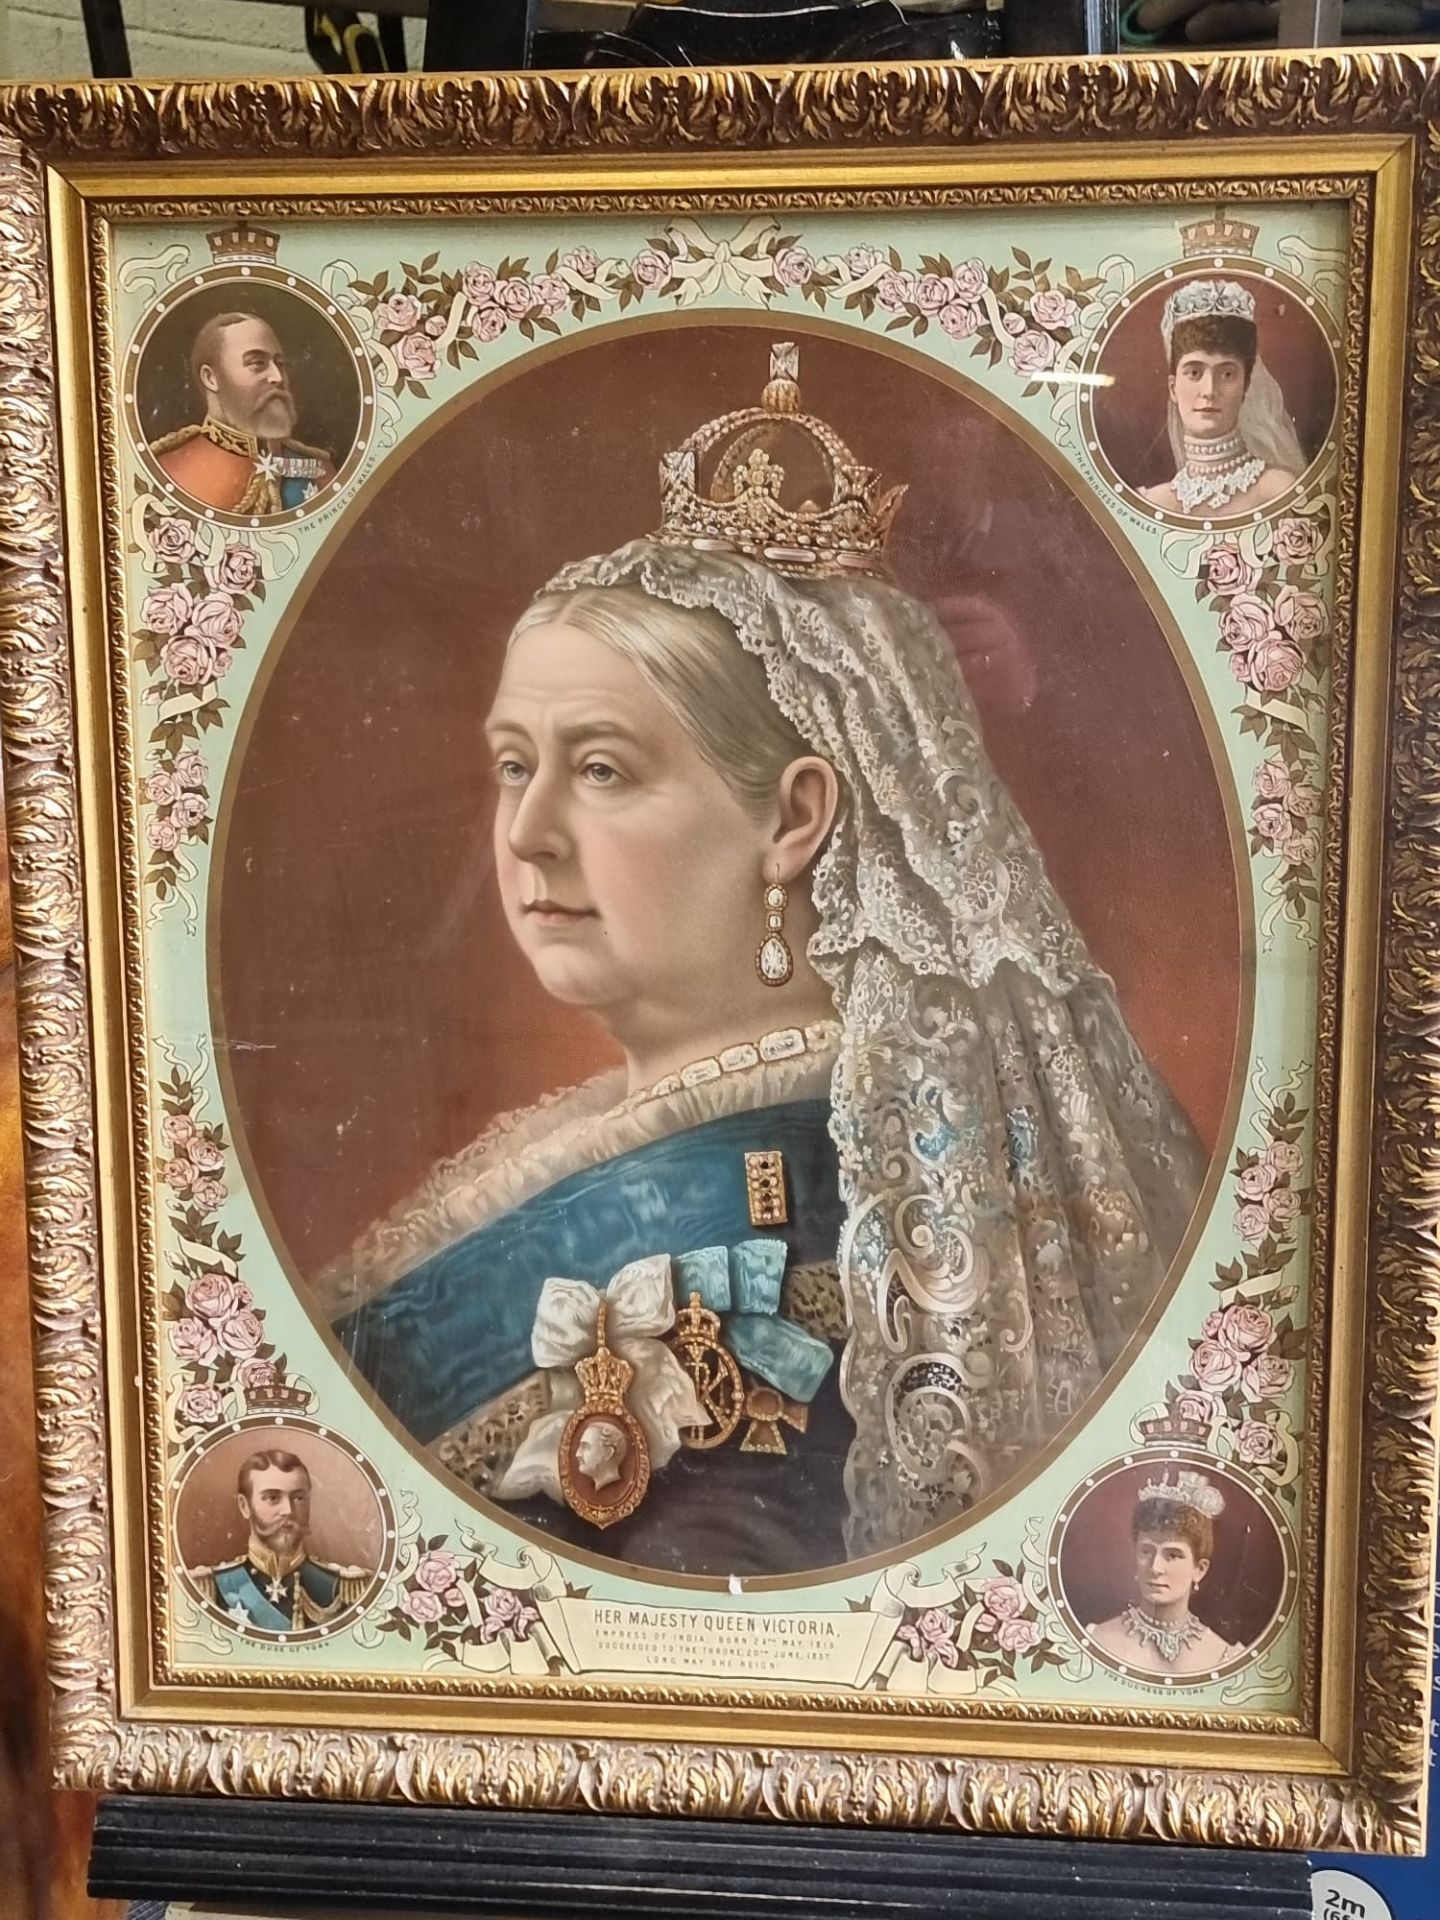 A Framed Print Of Queen Victoria With Inscription Plate Under Her Majesty Queen Victoria Empress - Image 8 of 9